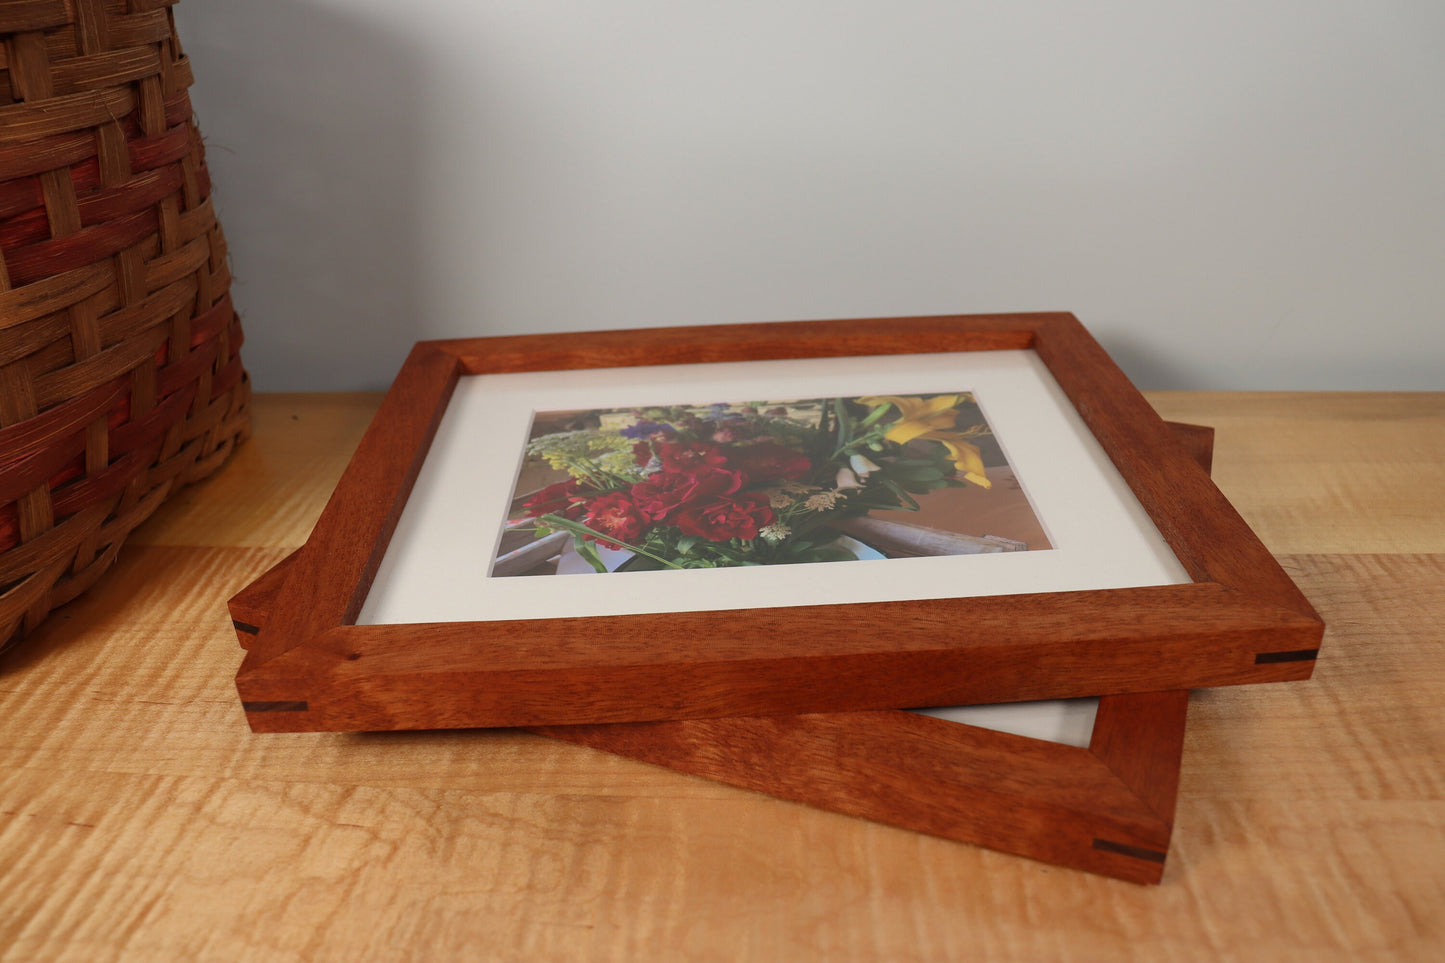 Mahogany Gallery Frame - Minimalist Profile - Picture Frame | Natural Wood Frame